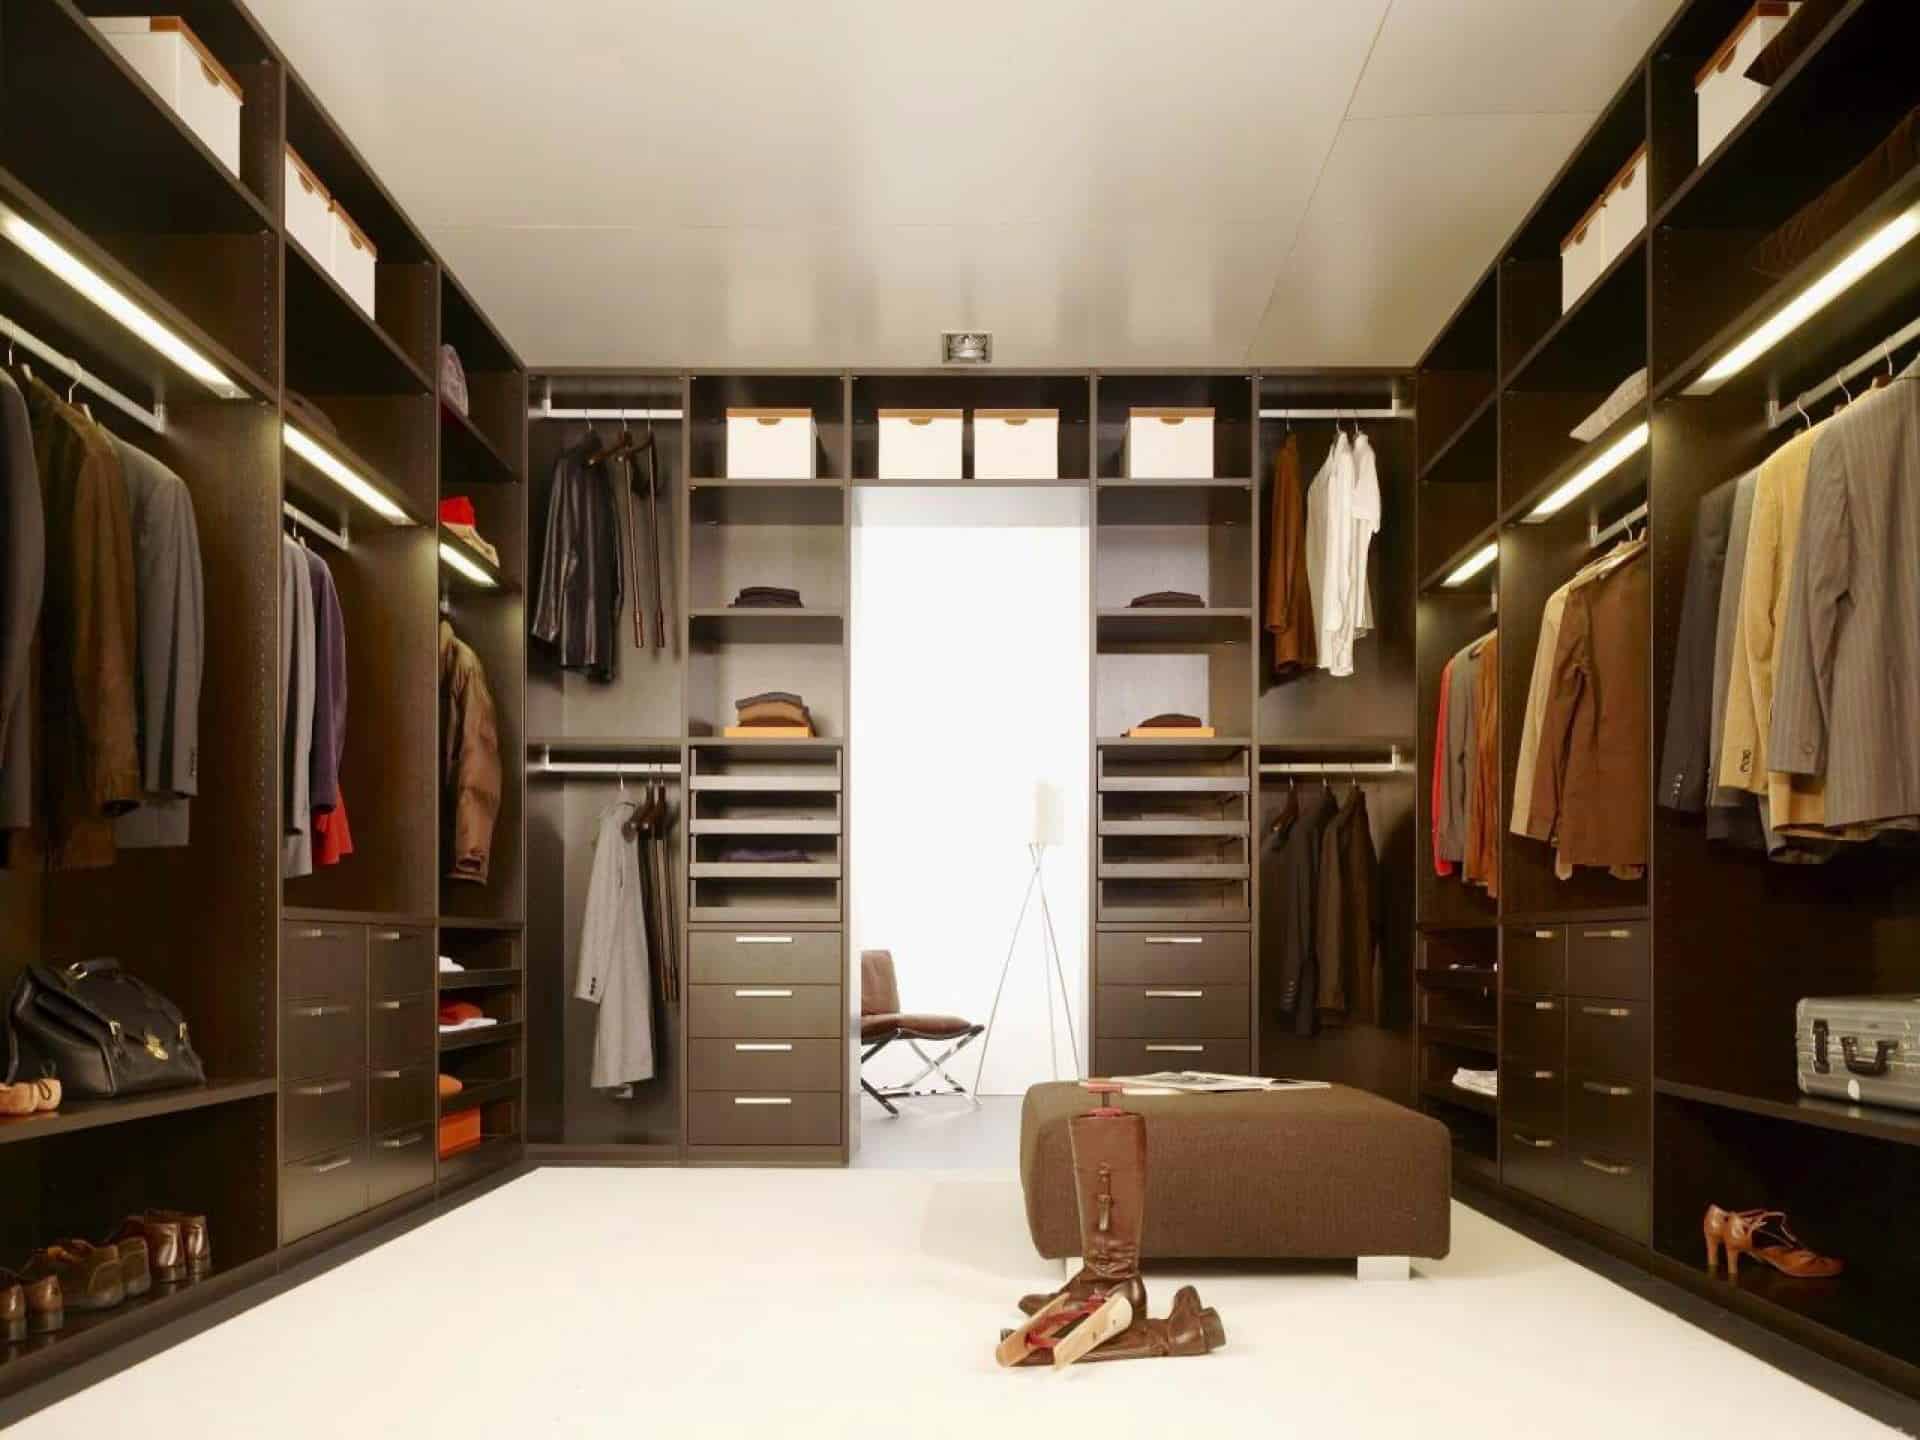 Large Closet with carpet and special hangers that allow even shorter people to hang their clothes on the top rack